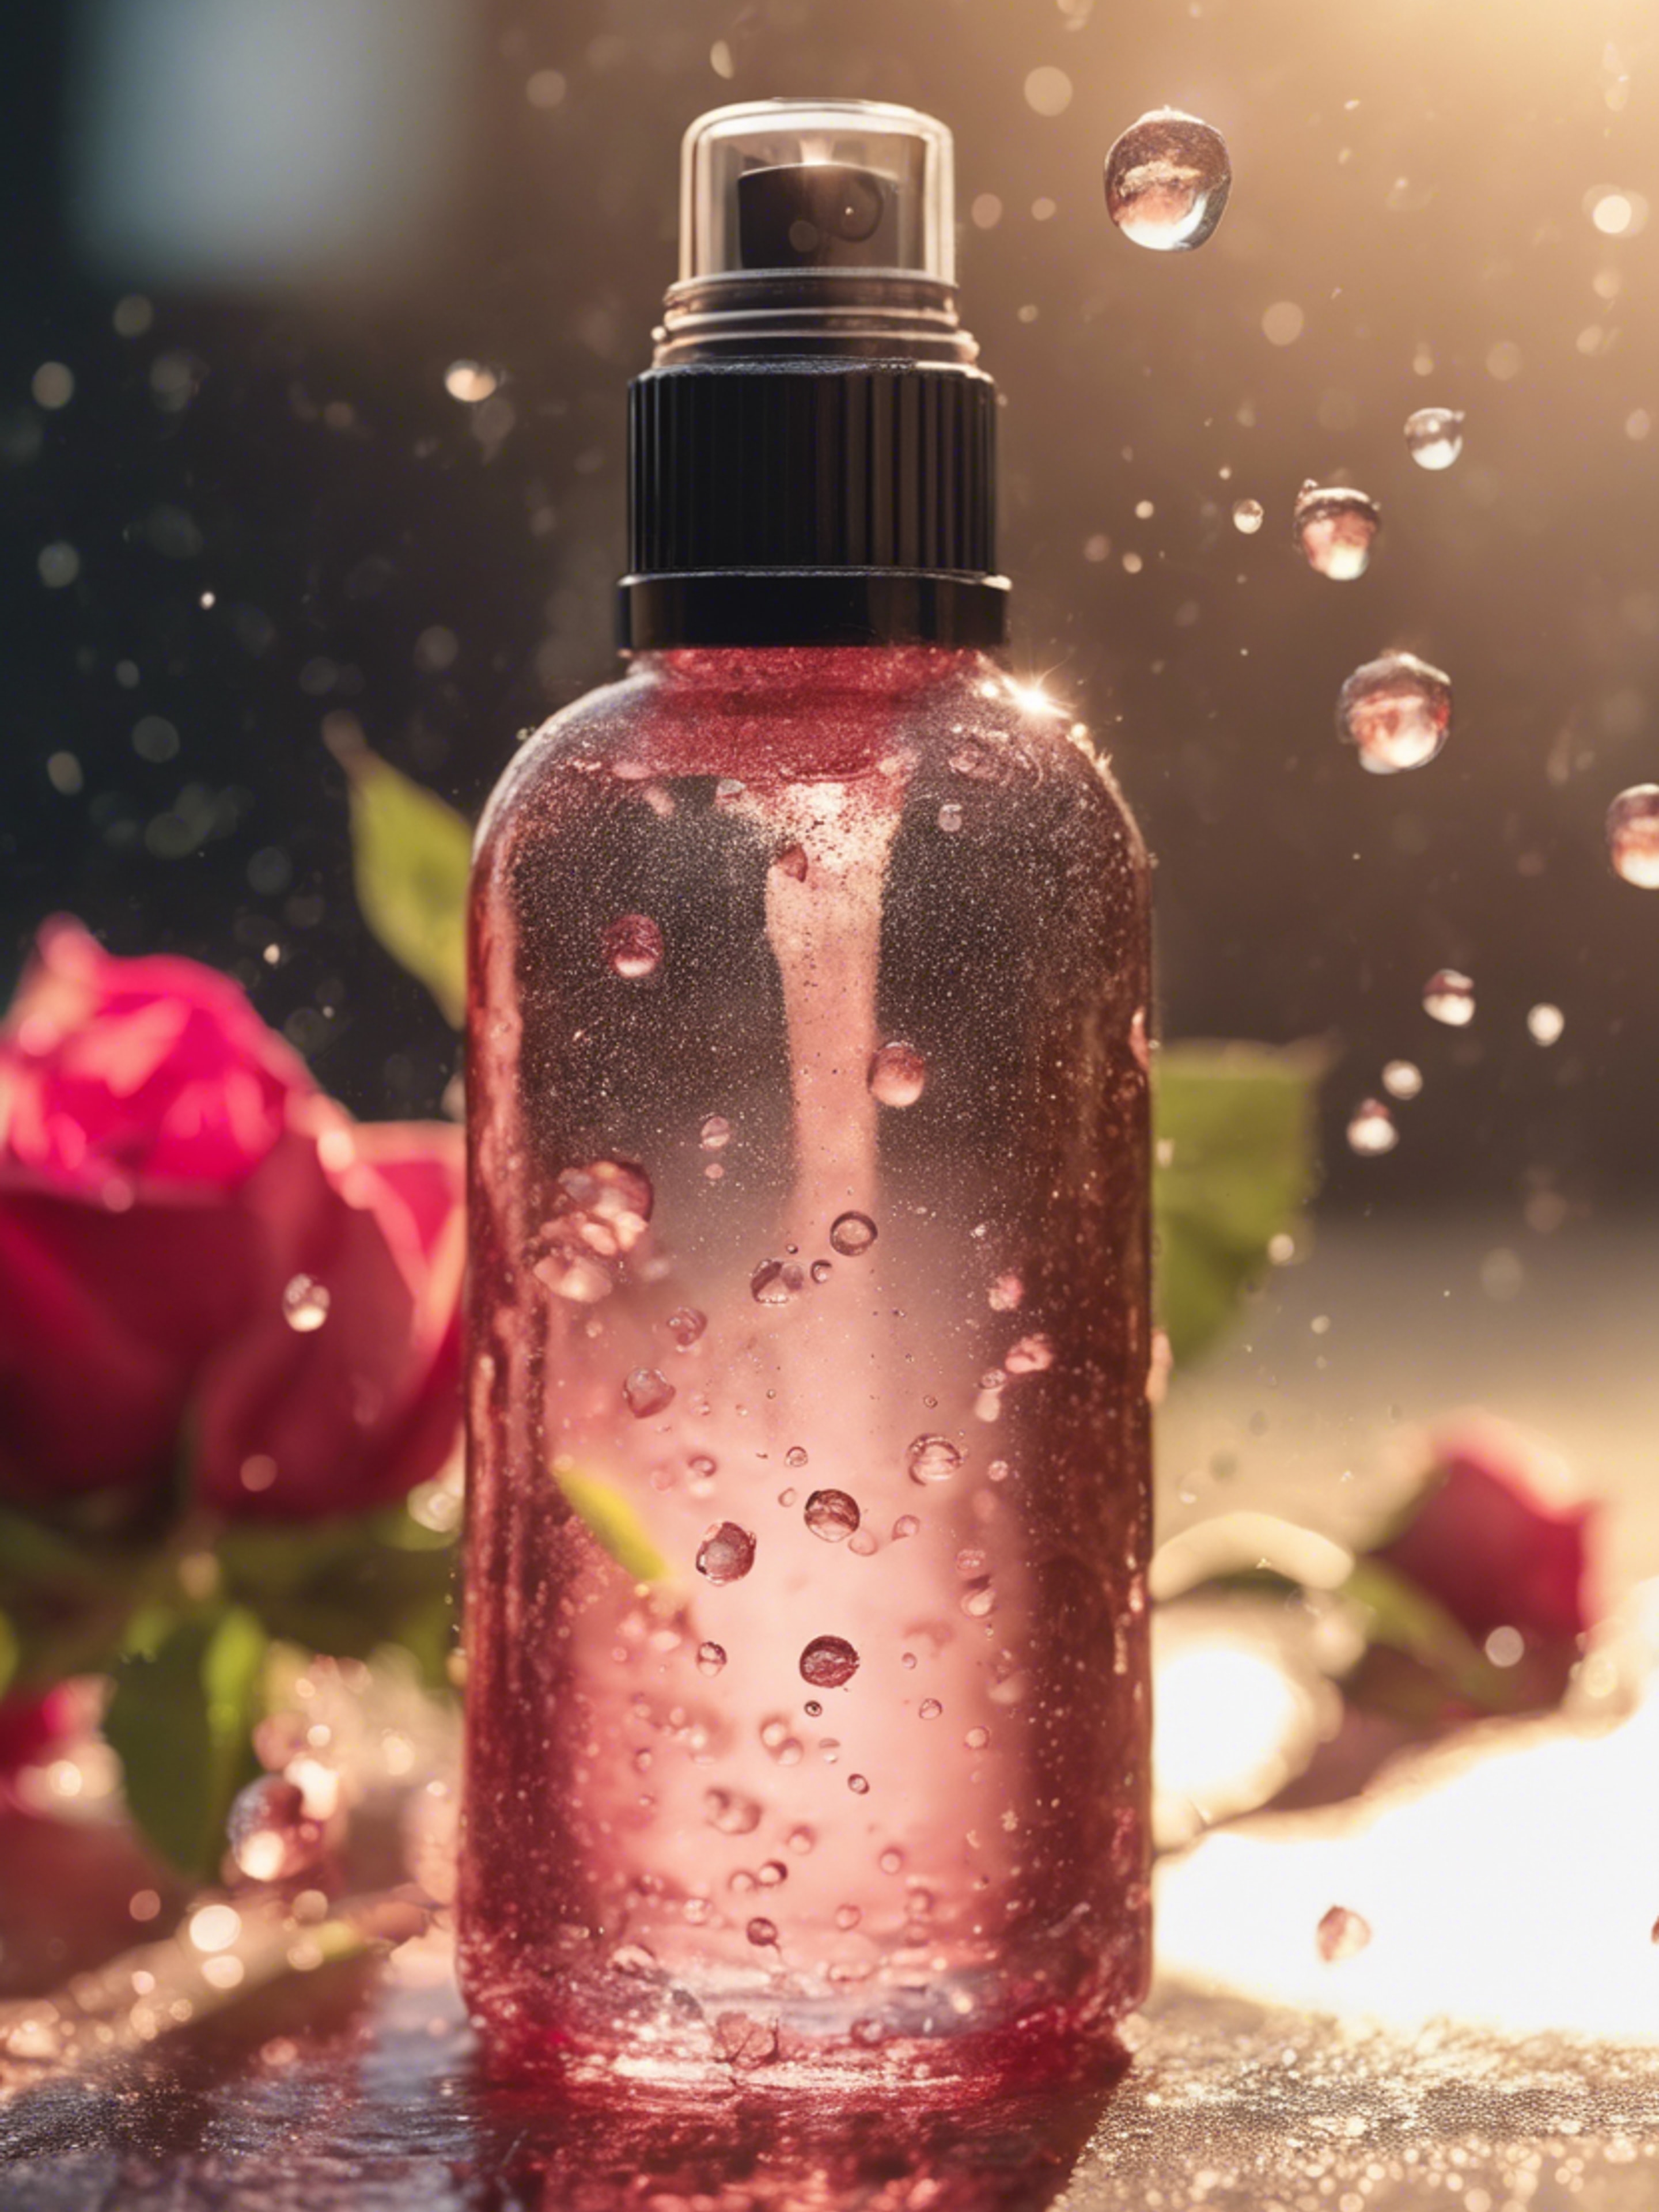 A refreshing spray bottle of rose water toner sprinkling droplets in the sunlight.壁紙[f1b2cb92d7c7439692a8]